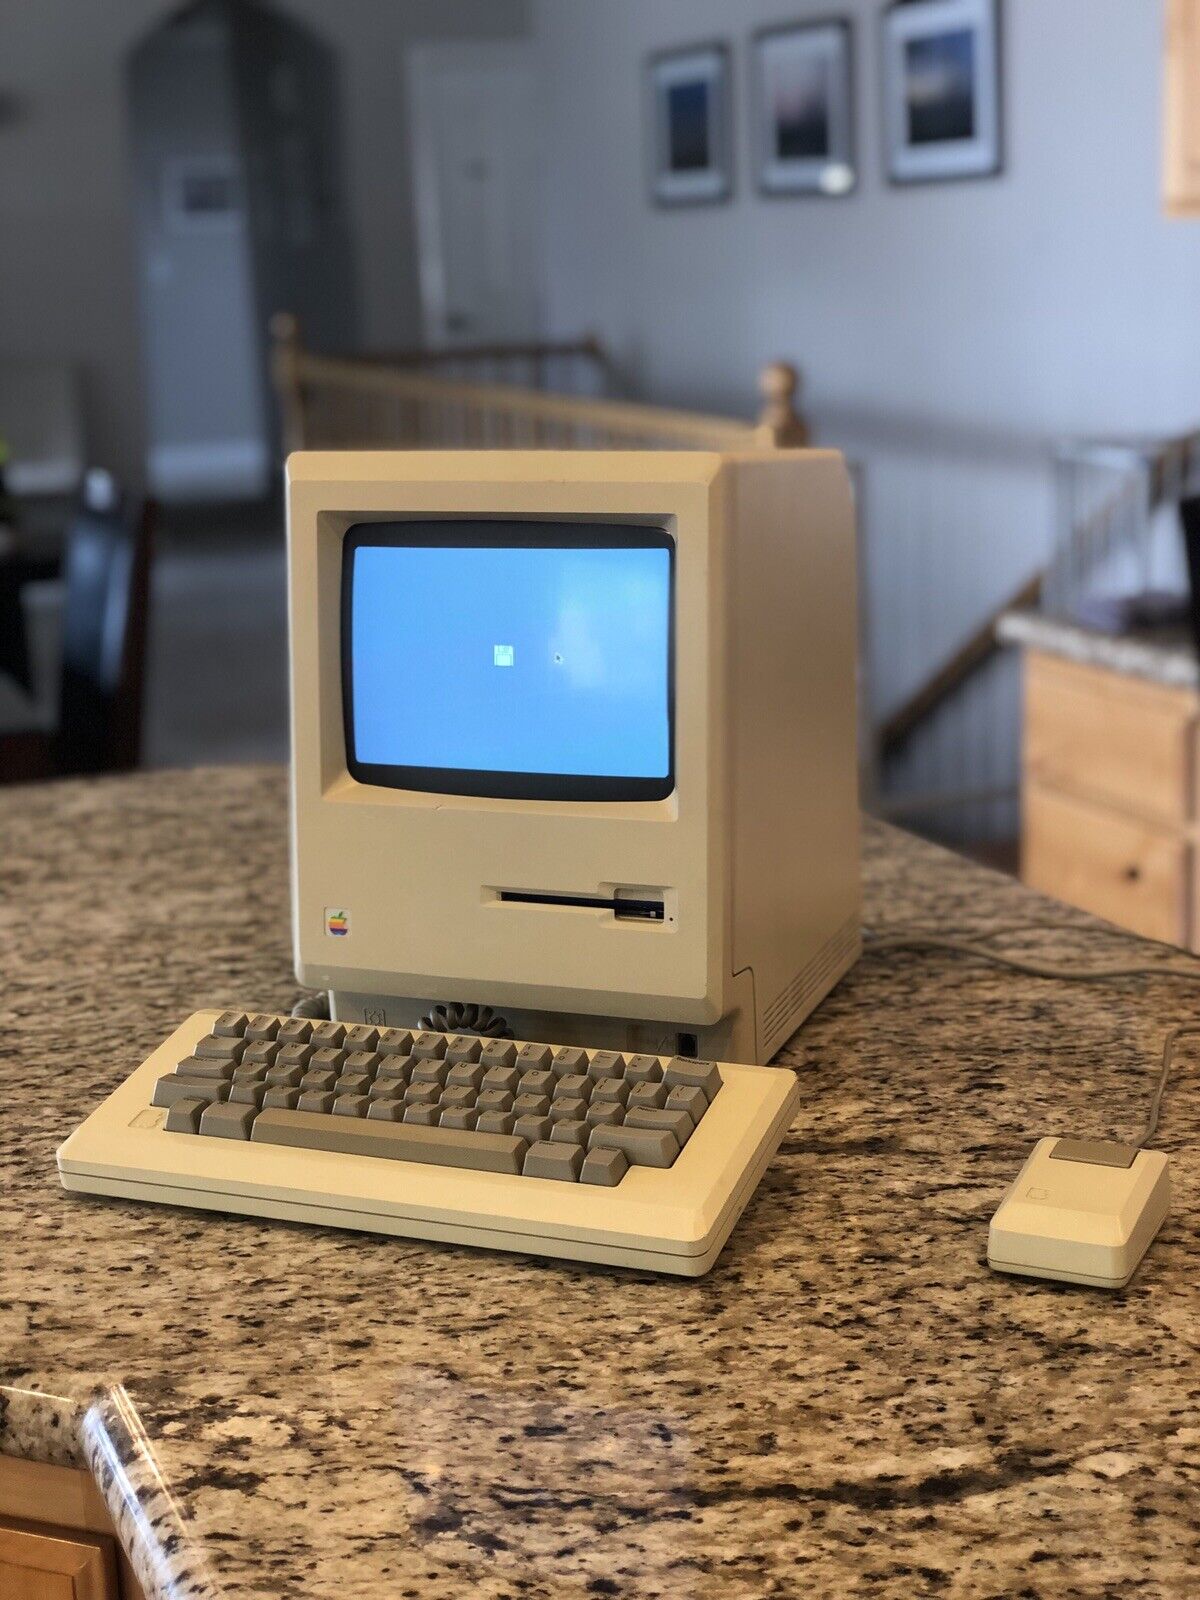 1984 Macintosh 128k M0001 With Keyboard and Mouse VINTAGE